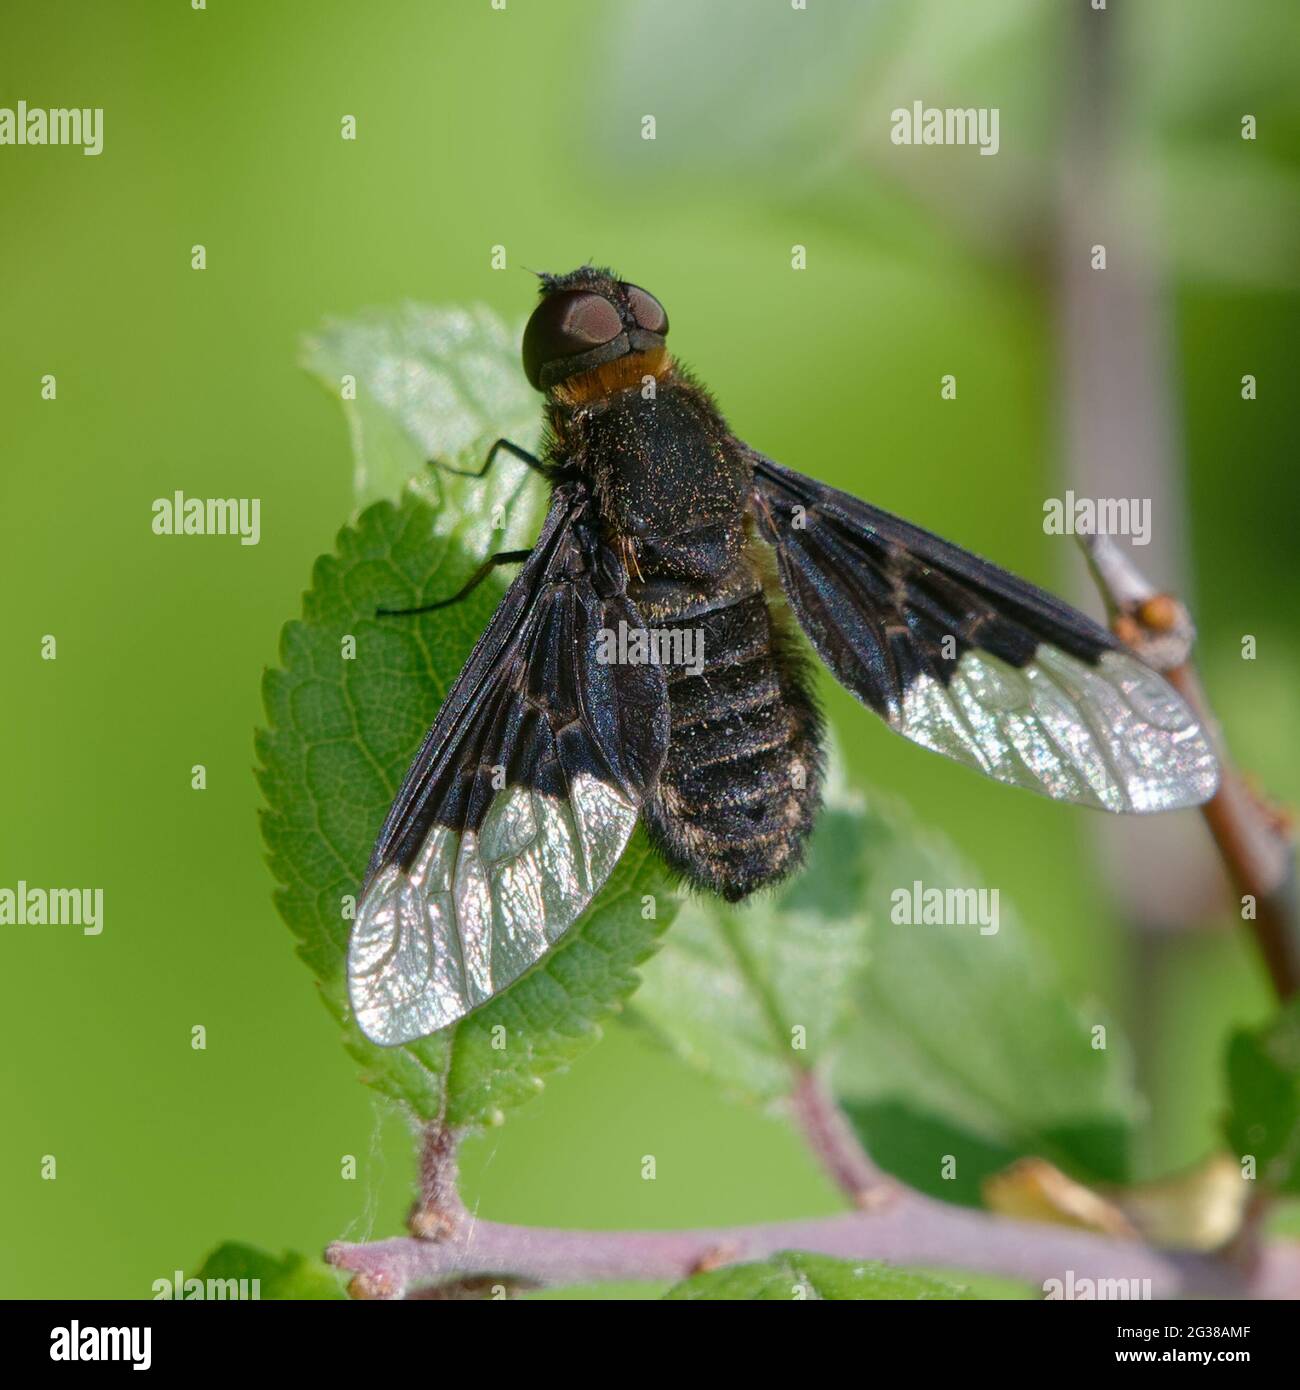 Bee fly (Hemipenthes morio) on a leaf Stock Photo